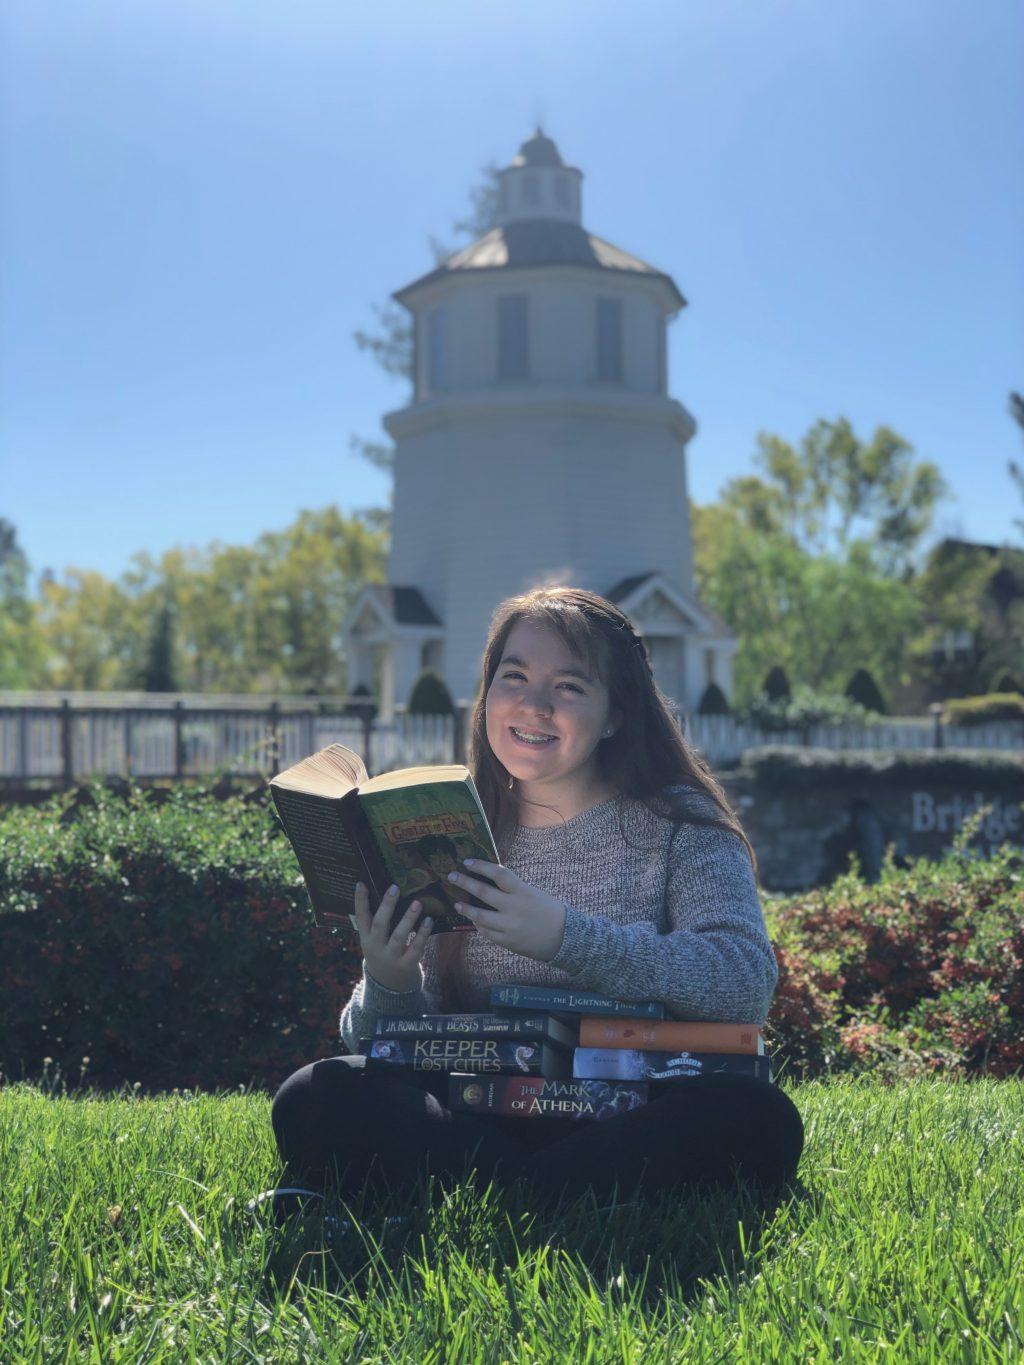 Reader Navia incorporated one of her interests, books, into her senior portraits.